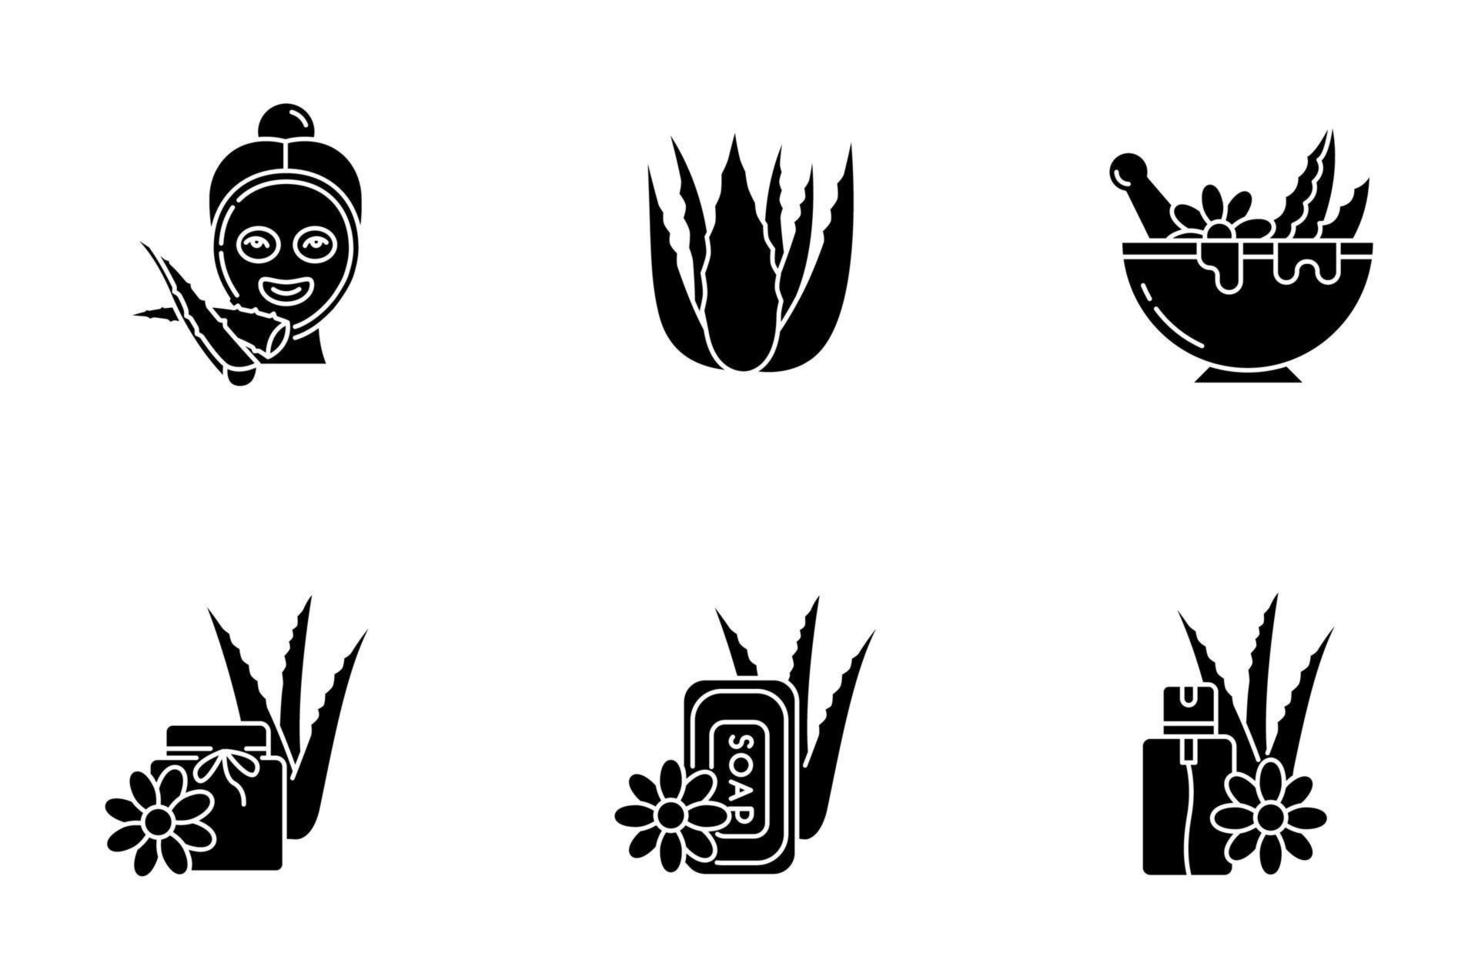 Aloe vera black glyph icons set on white space. Facial mask. Spa treatment. Medicinal herbs for dermatology. Cosmetic spray, plant based soap. Silhouette symbols. Vector isolated illustration